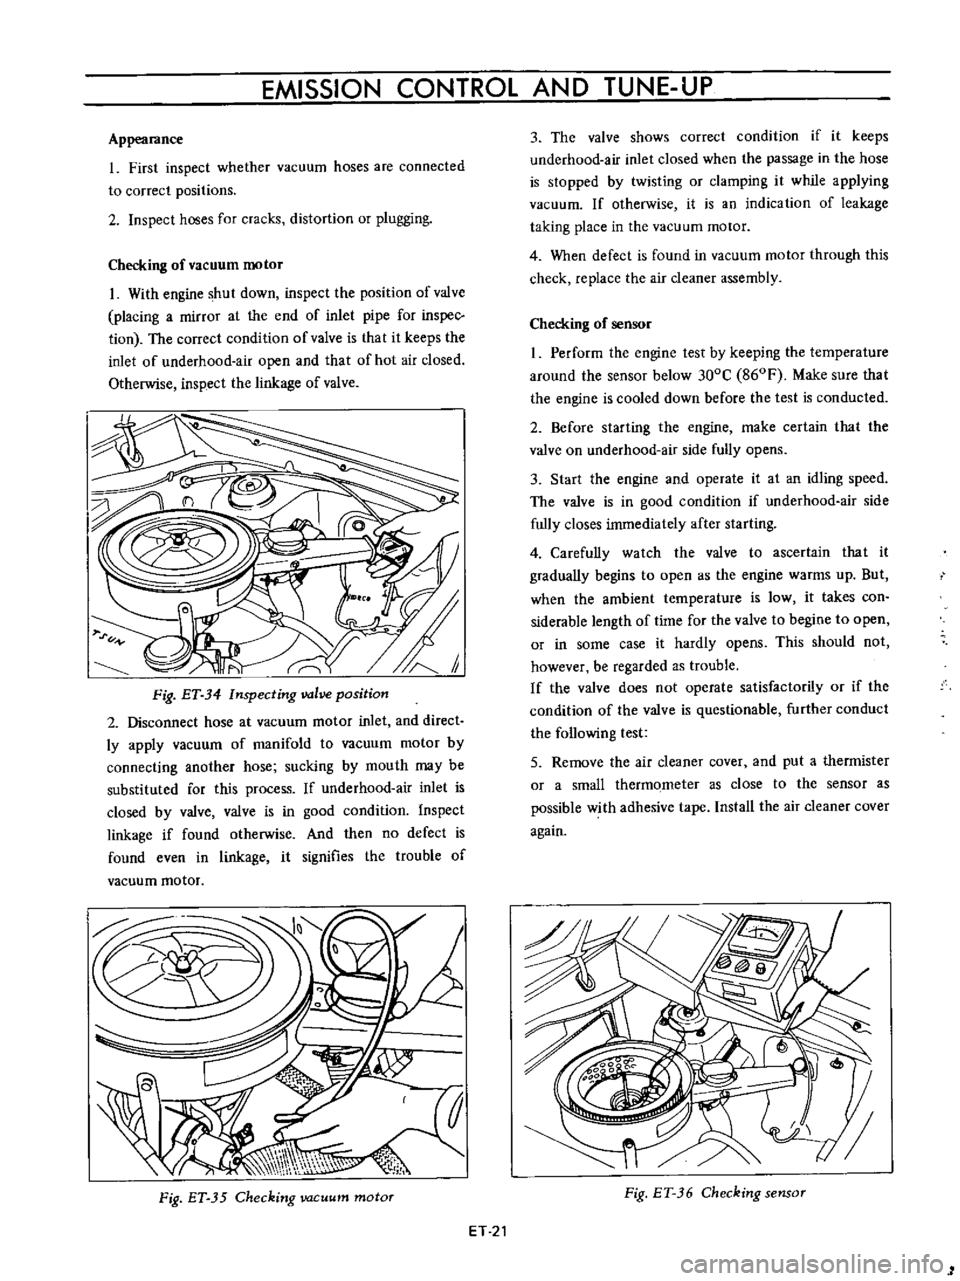 DATSUN B110 1973  Service User Guide 
EMISSION 
CONTROL 
AND

TUNE 
UP

Appearance

1 
First

inspect 
whether 
vacuum 
hoses

are 
connected

to 
correct

positions

2

Inspect 
hoses

for 
cracks 
distortion 
or

plugging

Checking 
of